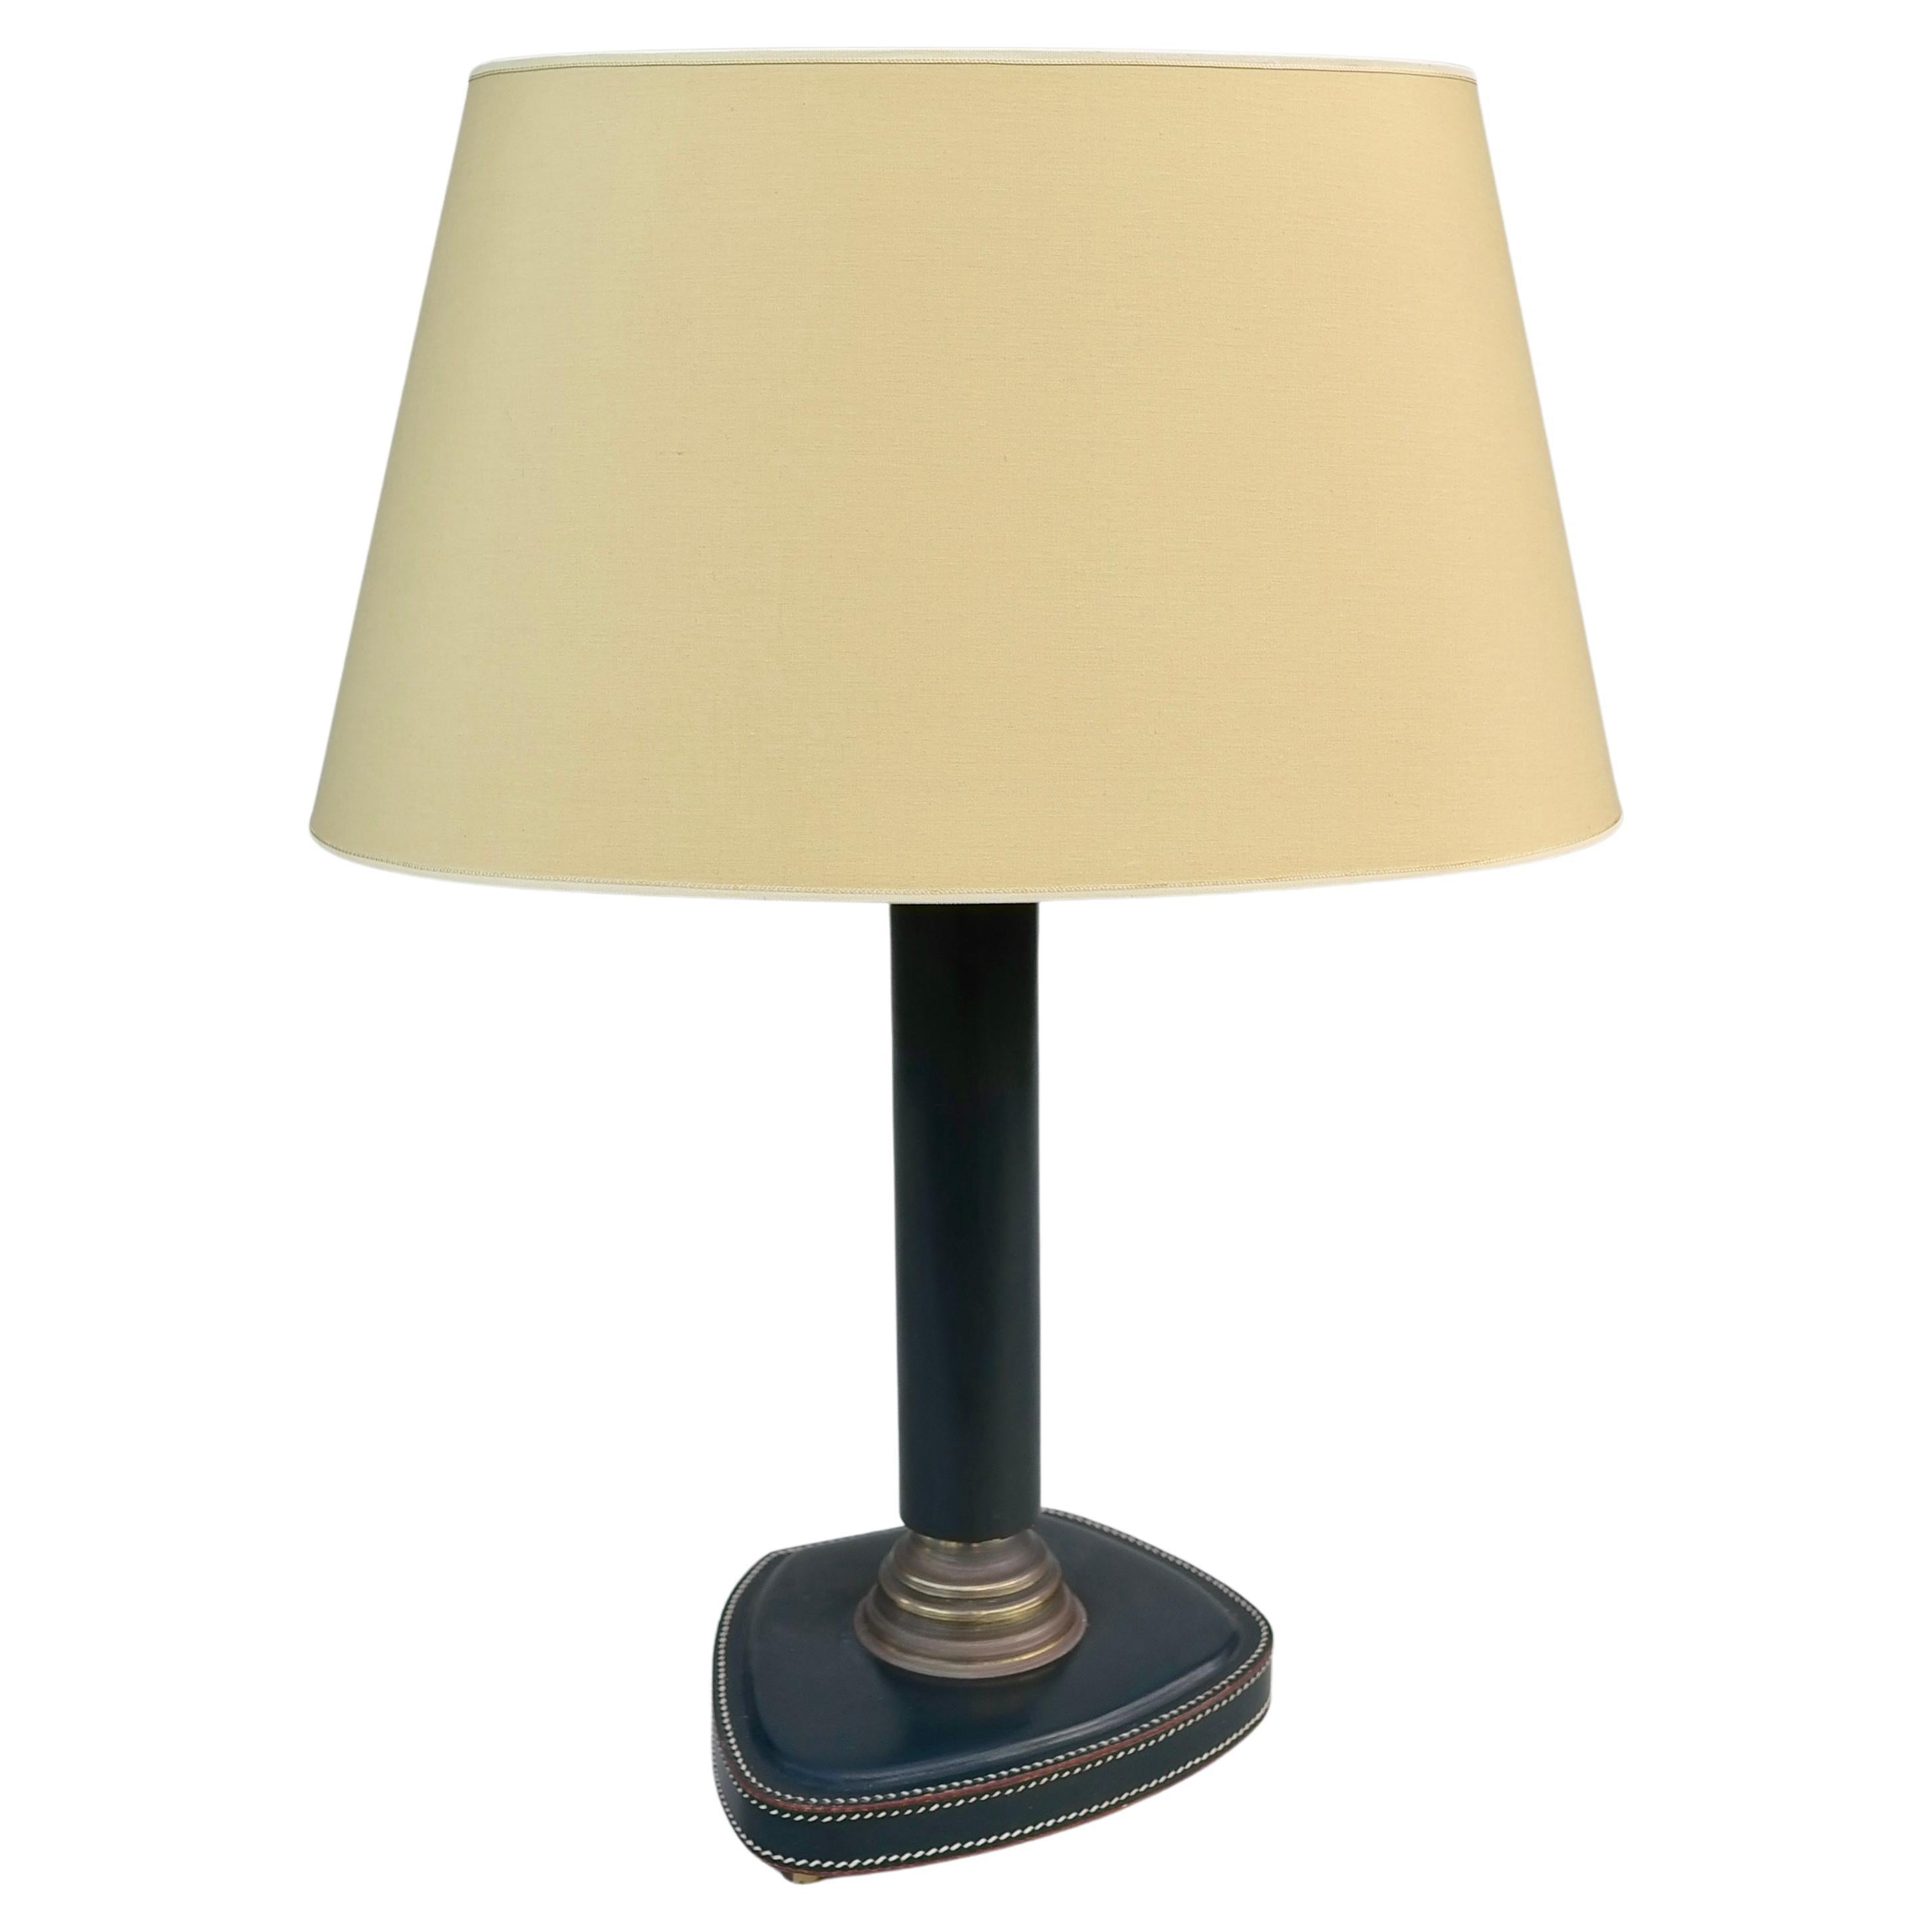 Hand-Stitched Green Leather Table Lamp, France, 1960s For Sale